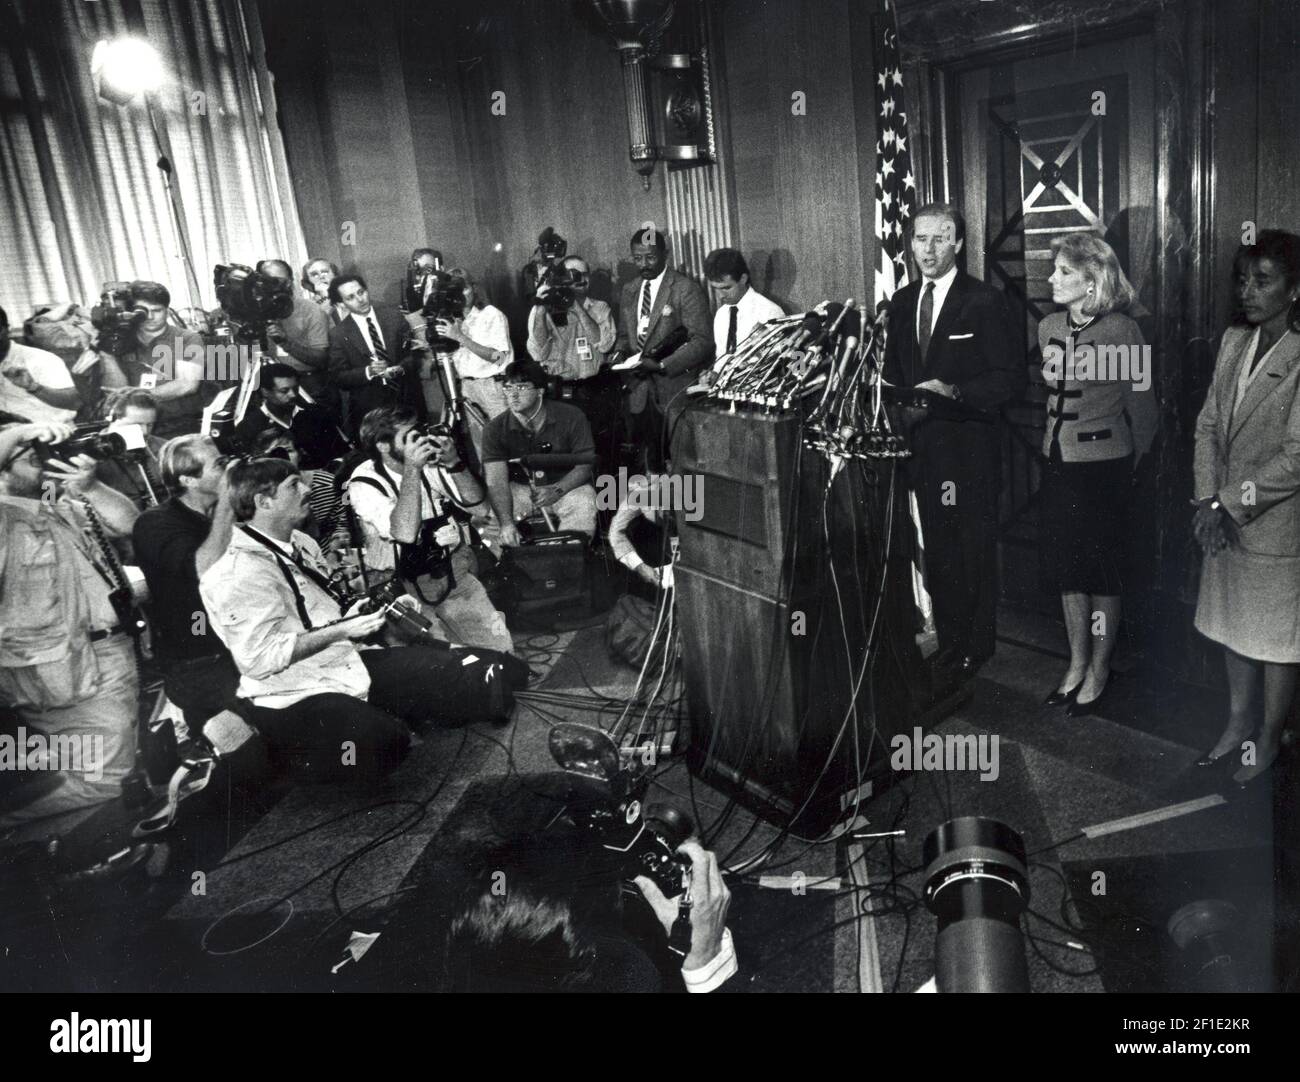 Sep 23, 1987; Washington, DC, USA; Sen. Joe Biden, with his wife Jill at his sides, holds a press conference on Capitol Hill to announce his withdrawal from the presidential race on Sept. 23, 1987. Mandatory Credit: File Photo/The News Journal-USA TODAY NETWORK/Sipa USA Stock Photo